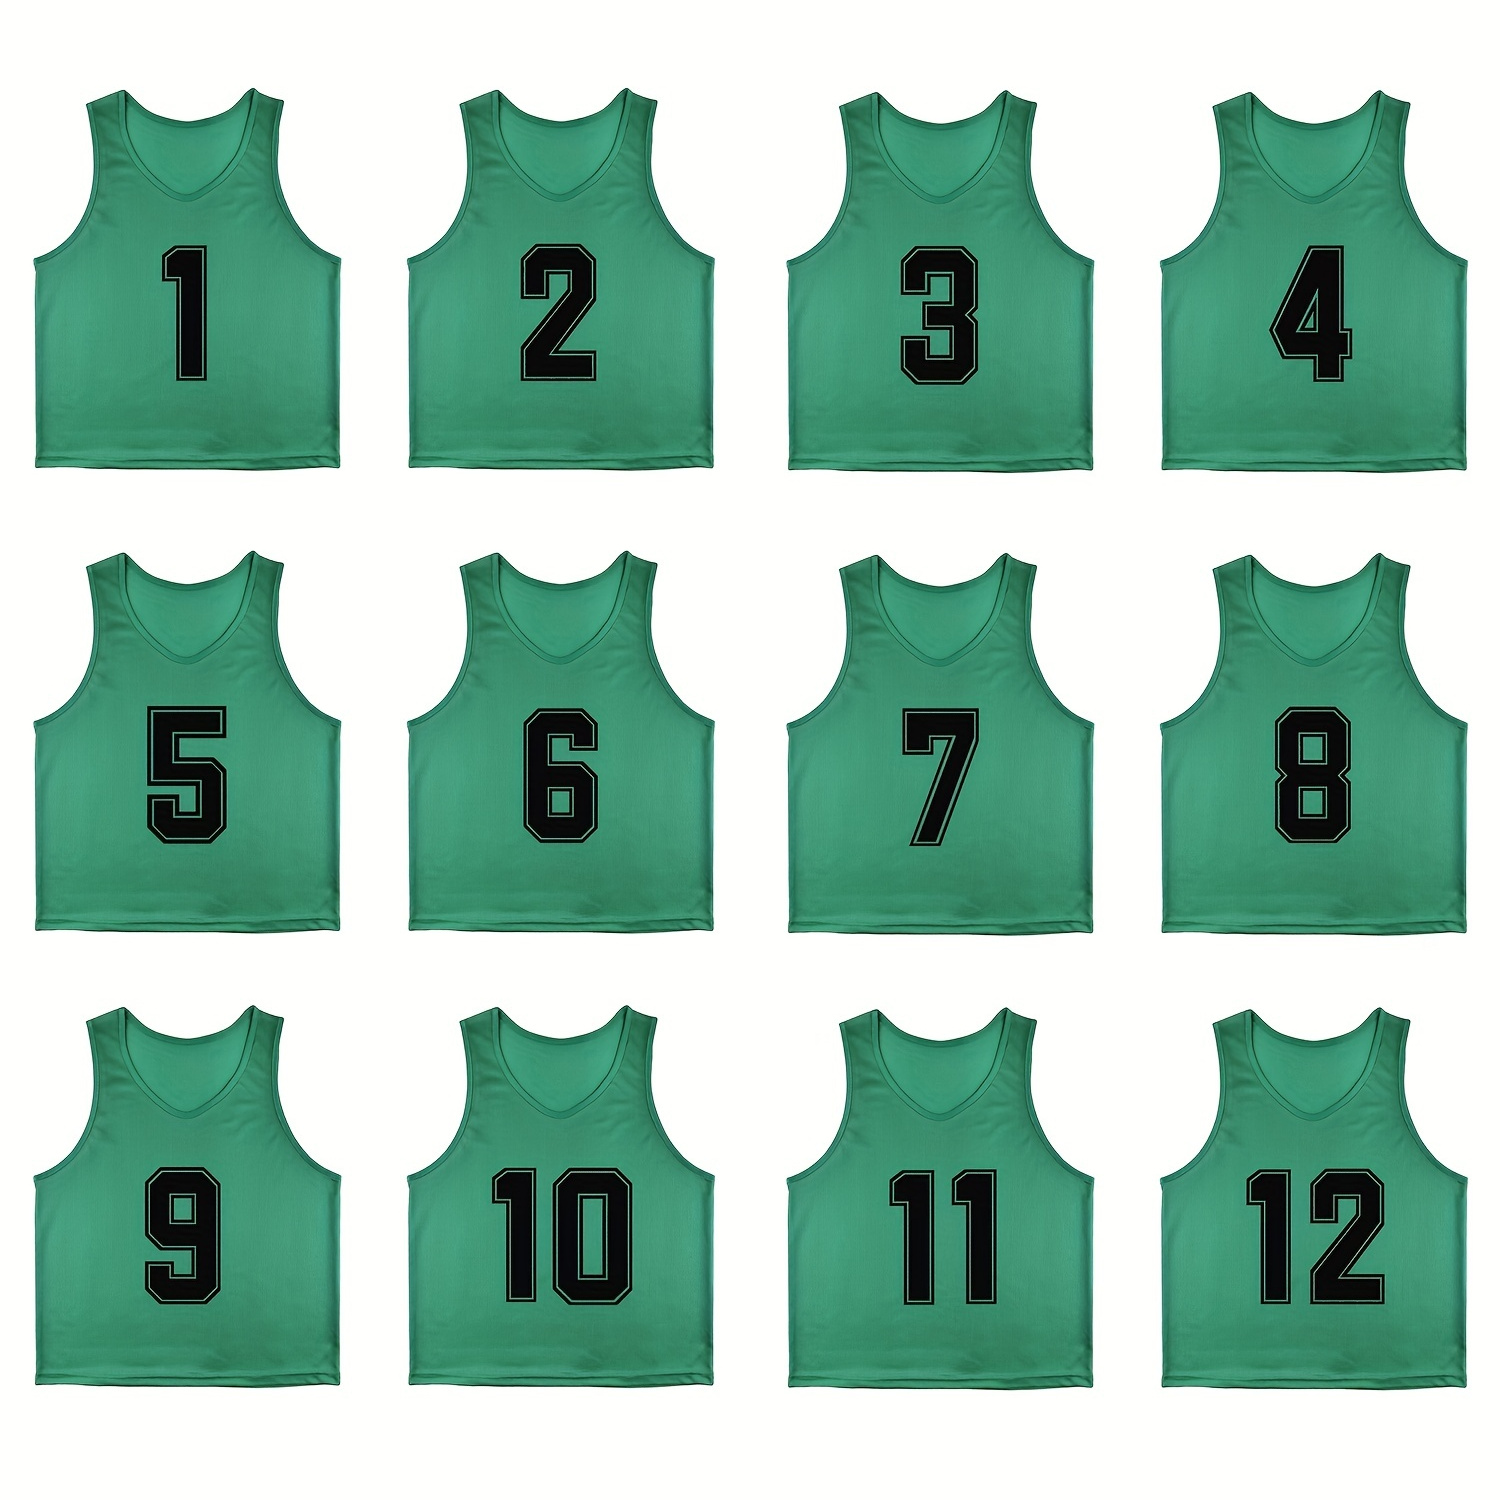 

Numbered 1-12 Mesh Scrimmage Team Practice Vests Pinnies Jerseys For Adult Sports Basketball, Soccer, Football (12 Jerseys)